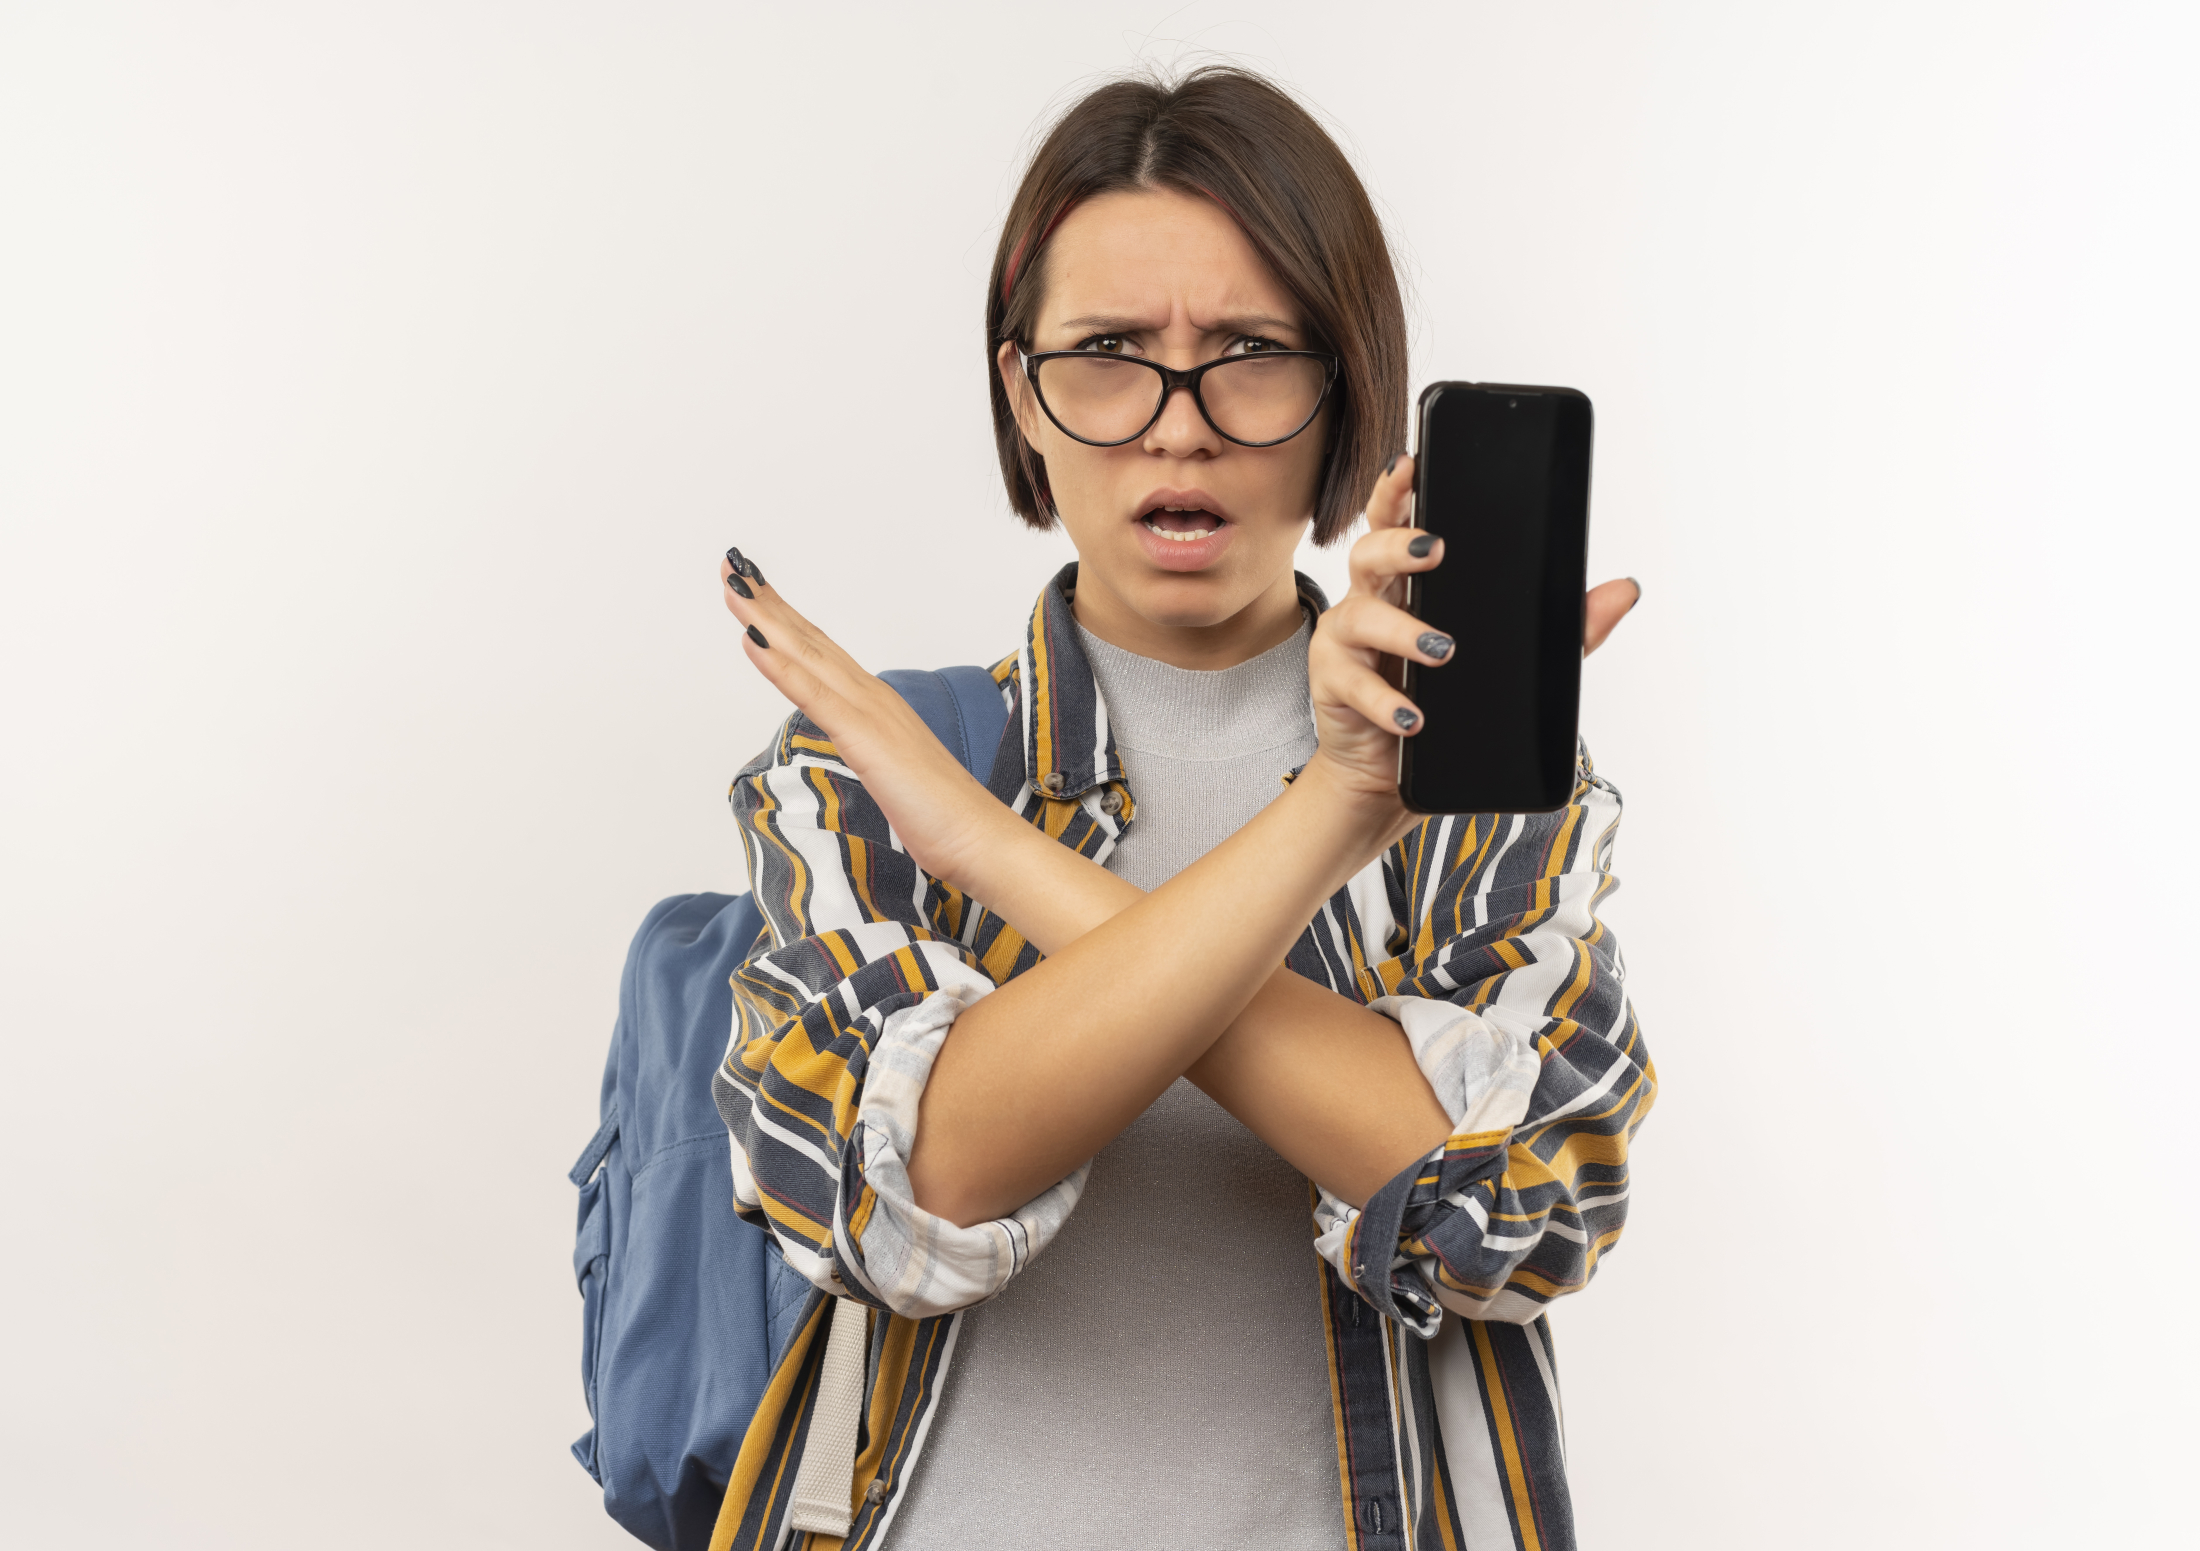 unpleased-young-student-girl-wearing-glasses-back-bag-showing-mobile-phone-doing-no-gesture-side-isolated-white-background-with-copy-space.jpg